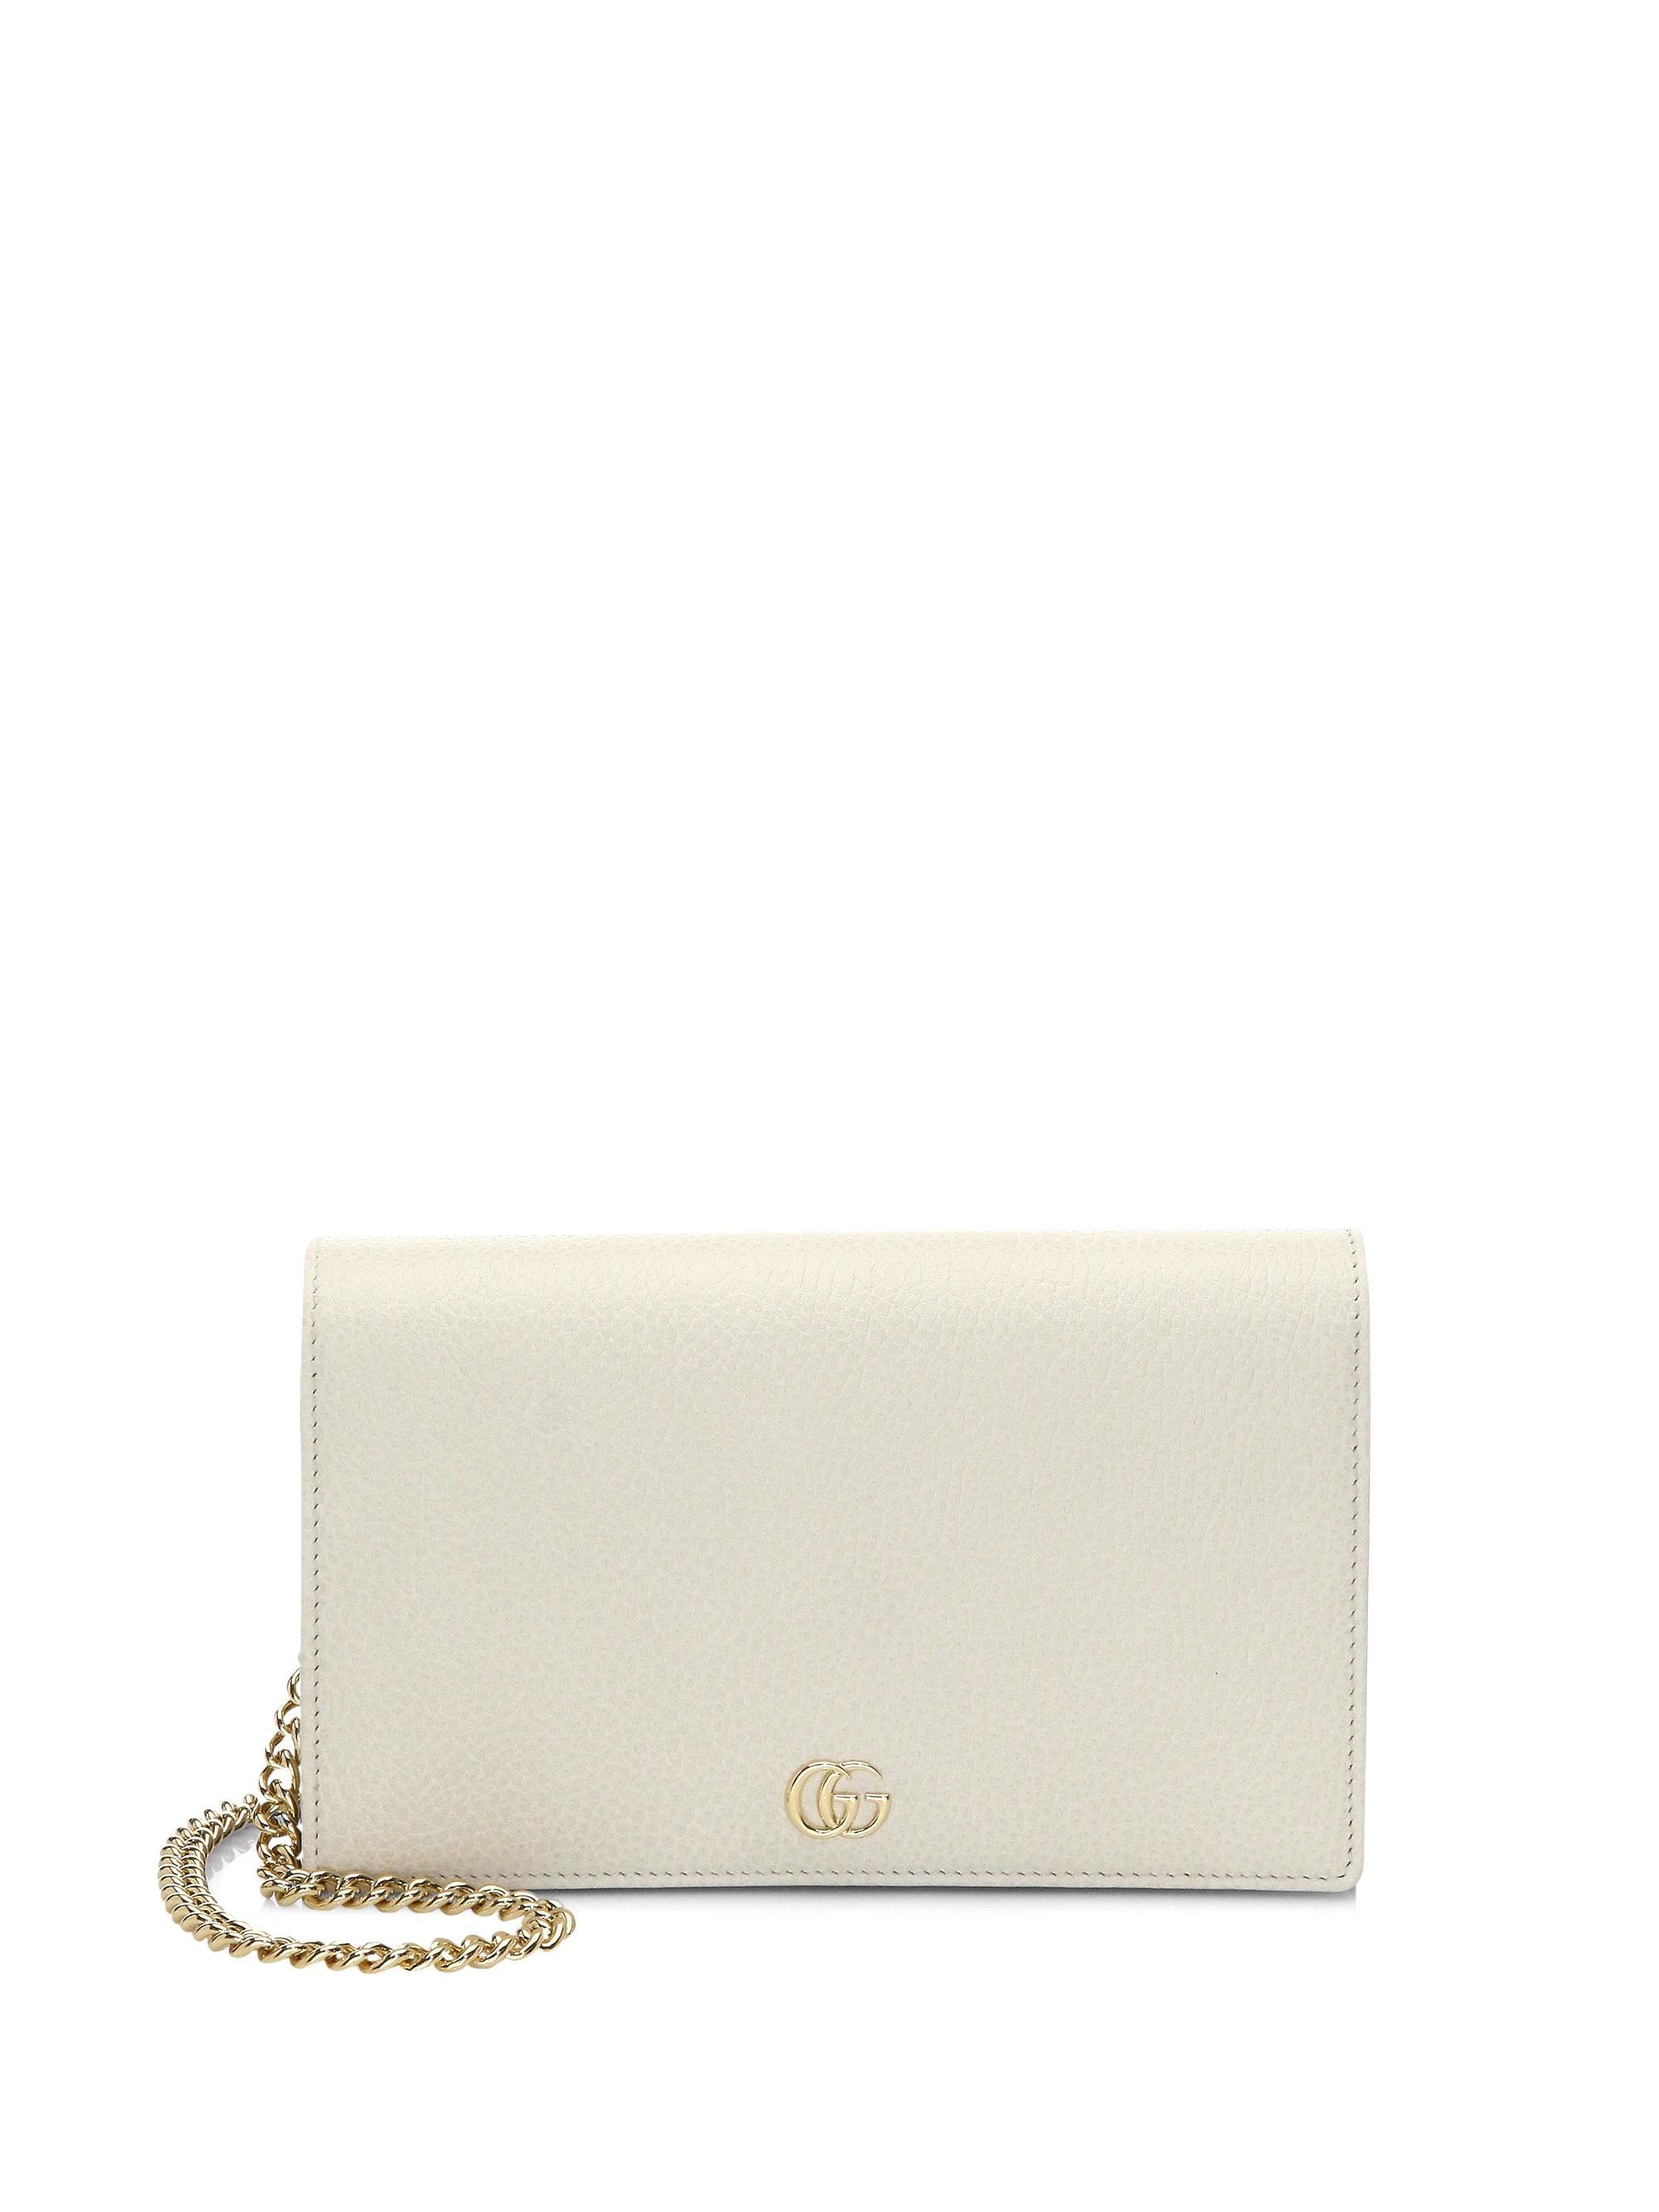 gucci petite marmont leather continental wallet